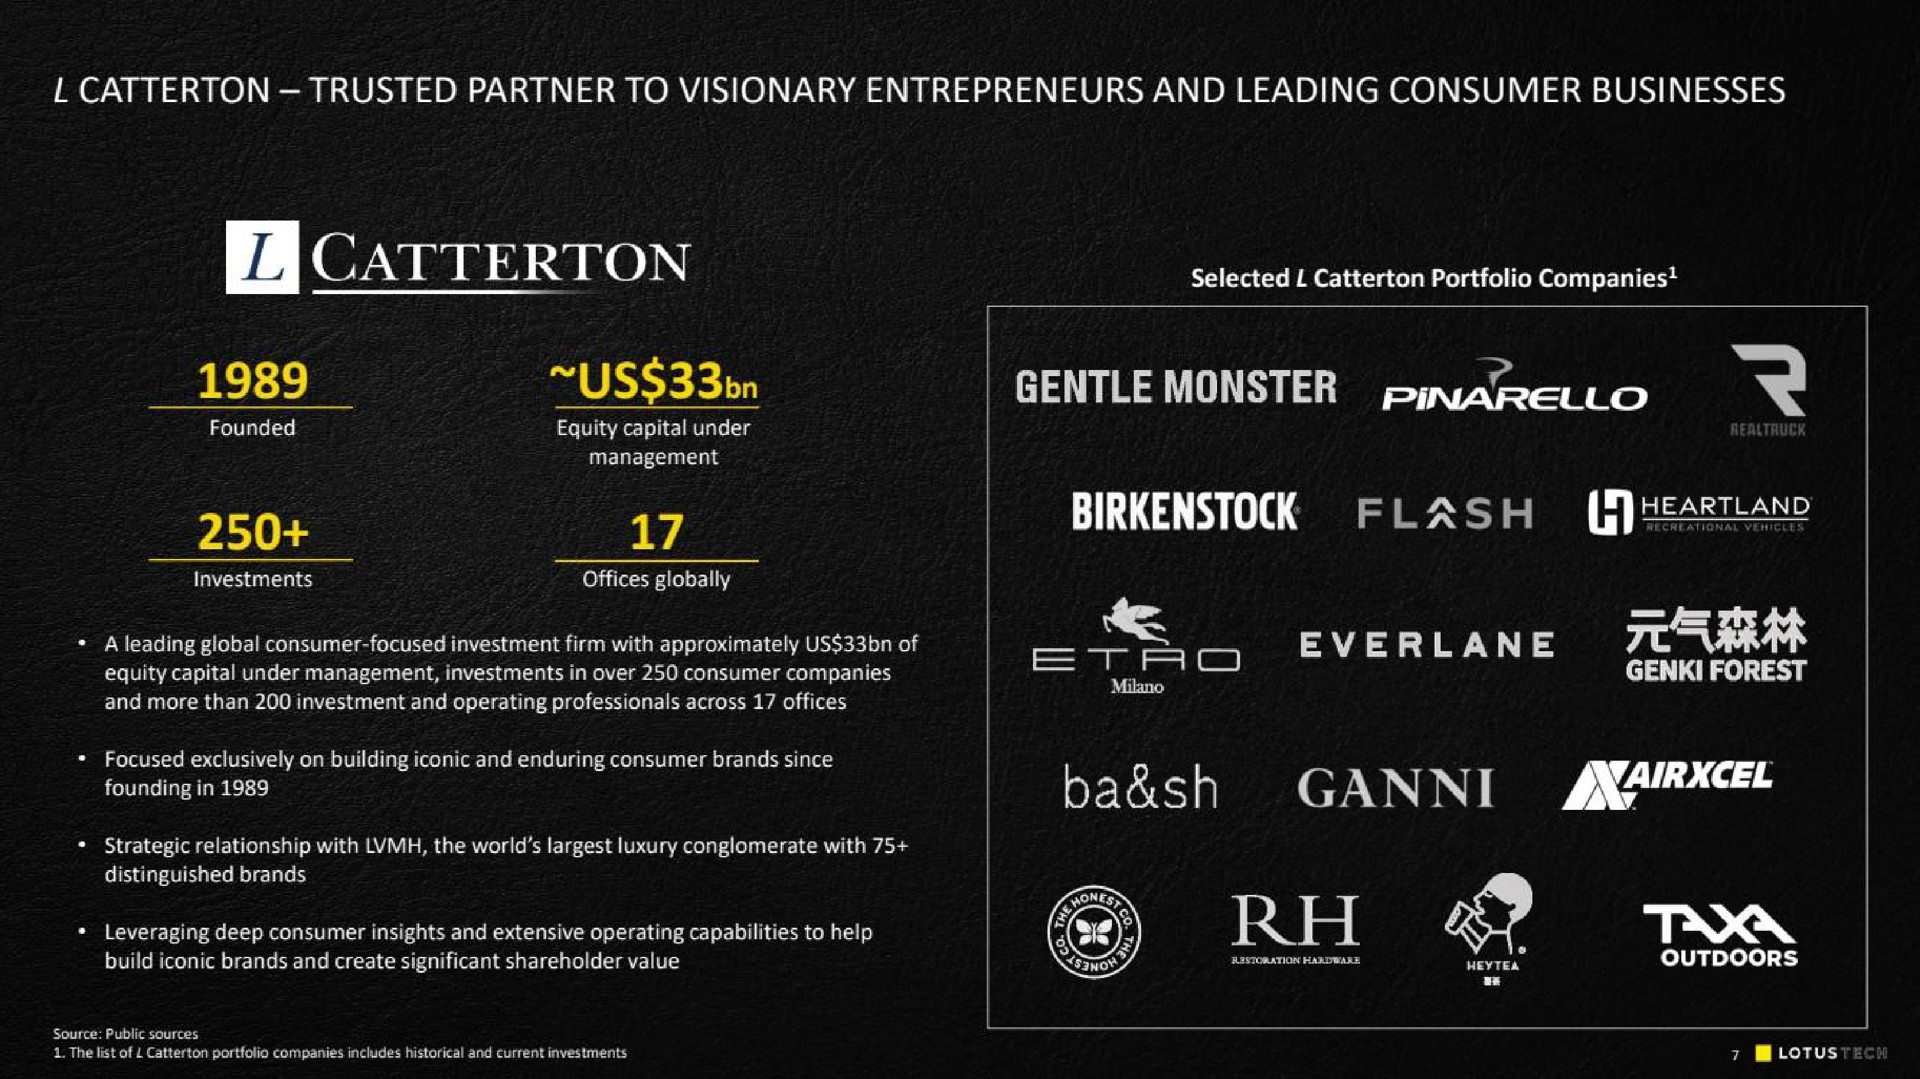 trusted partner to visionary entrepreneurs and leading consumer businesses torn gentle monster flash i at | Lotus Cars